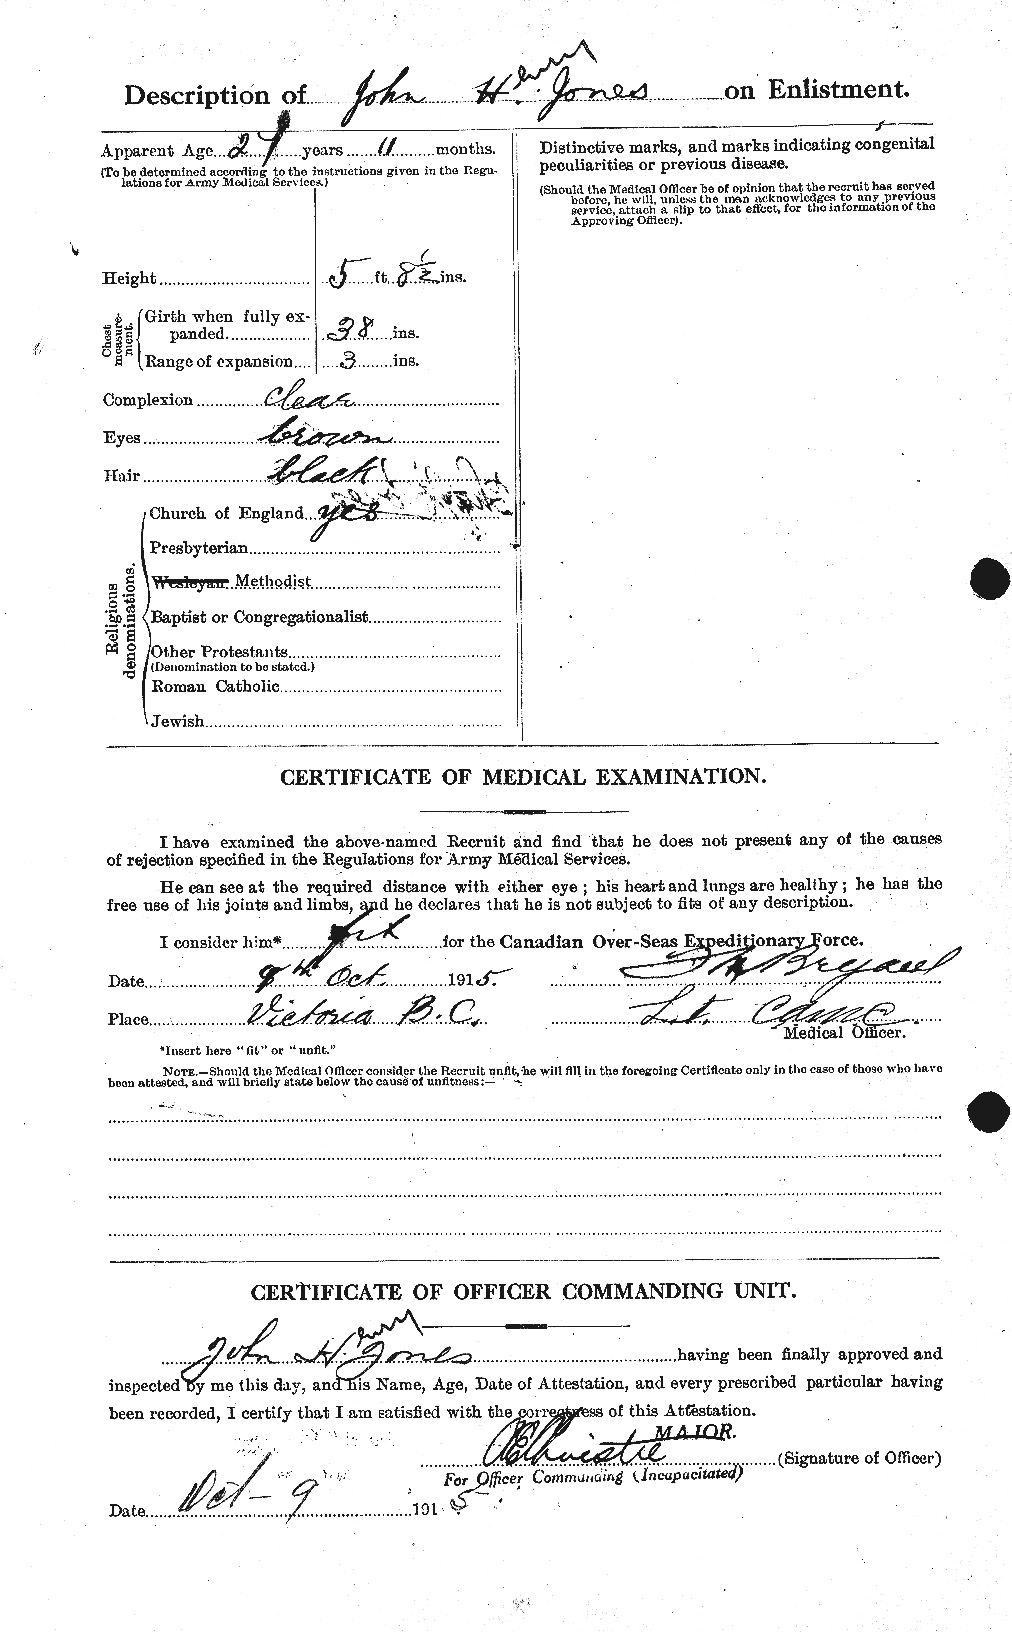 Personnel Records of the First World War - CEF 422192b